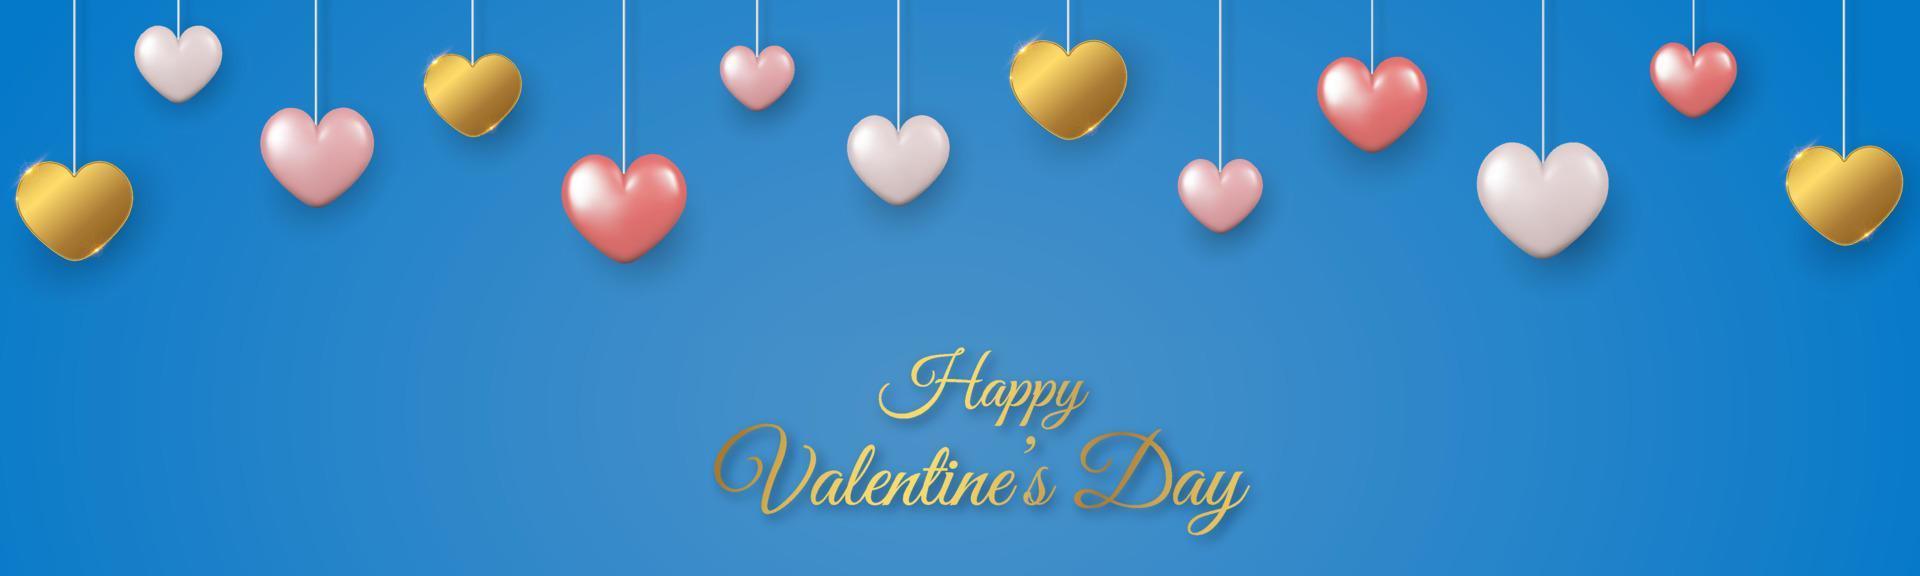 Happy Valentine's Day horizontal banner with pink, white and gold 3d hearts on blue background. vector